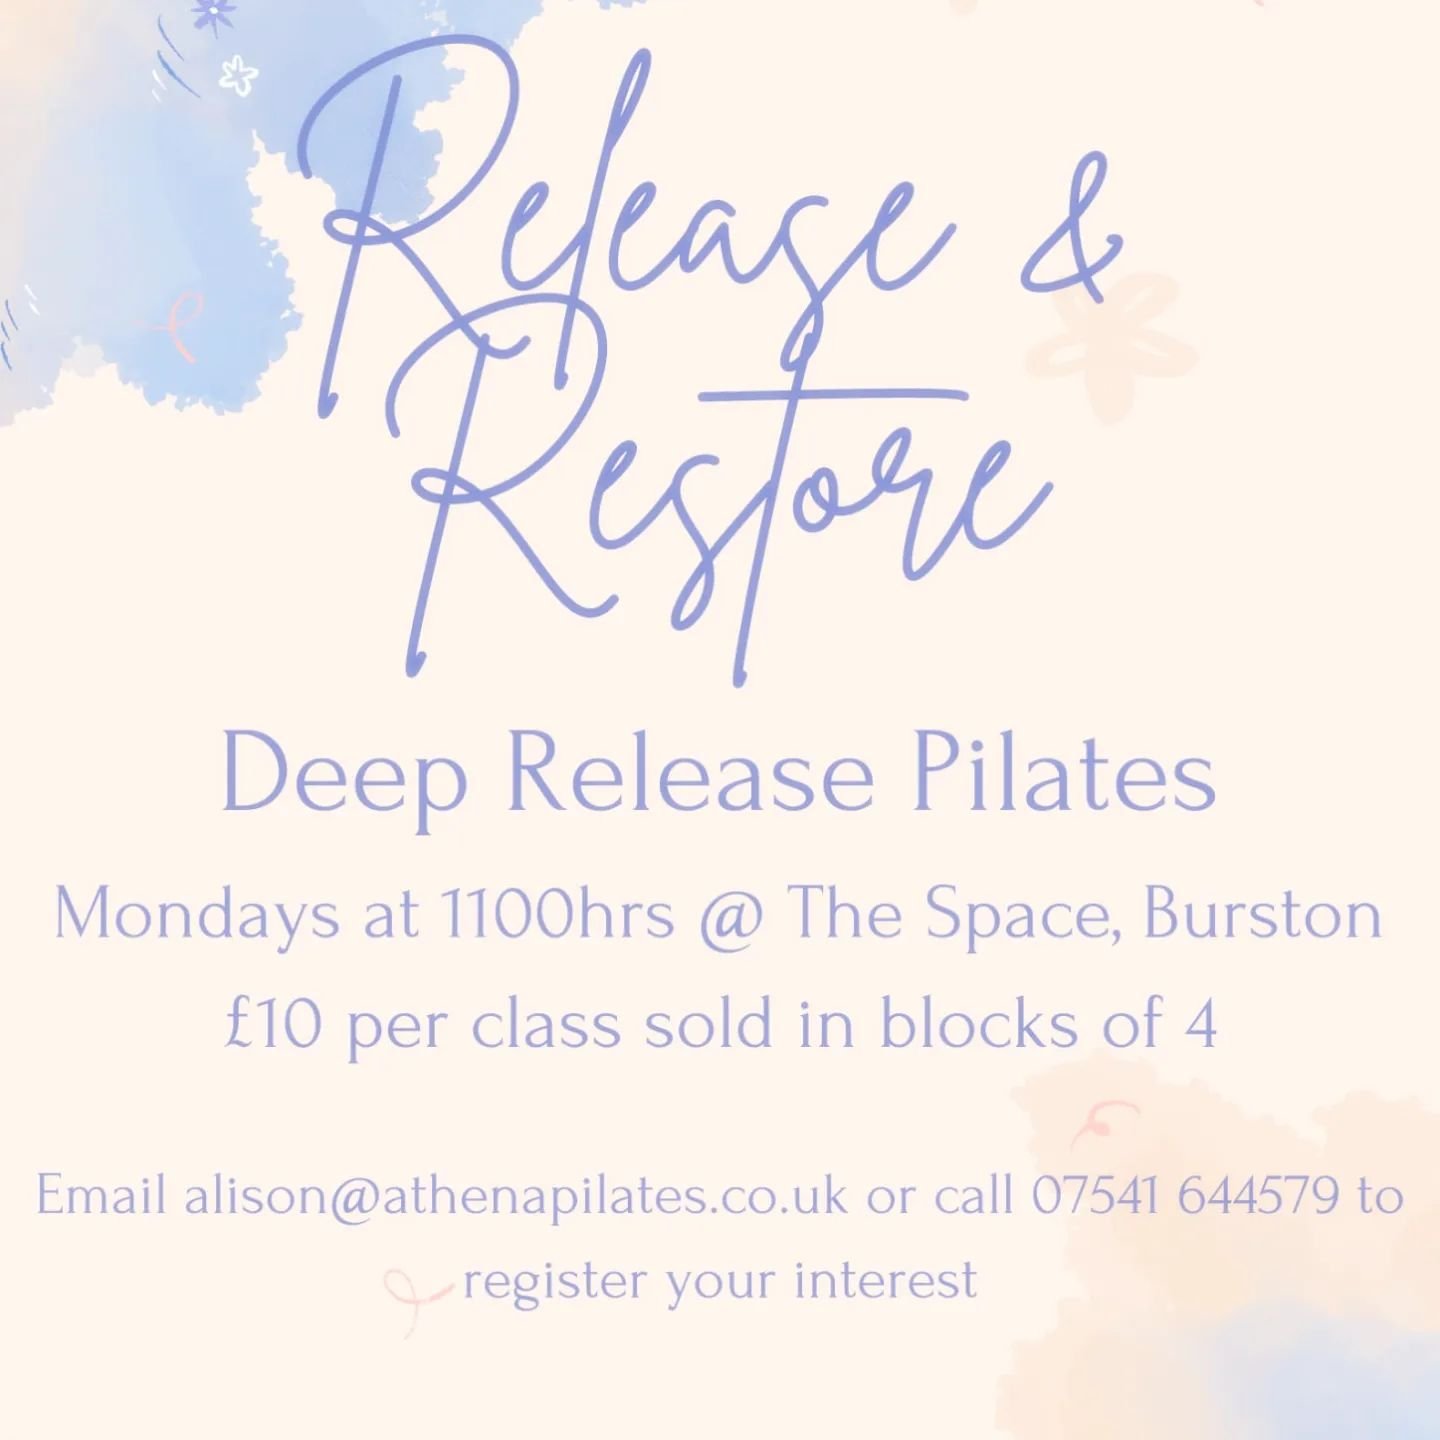 New Class!

Starting in June, join Alison @athenapilatesstudio for Deep Release Pilates. 

This class combines classical Pilates moves to strengthen the core with clinical myofascial principles to help alleviate chronic pain conditions. The class is 